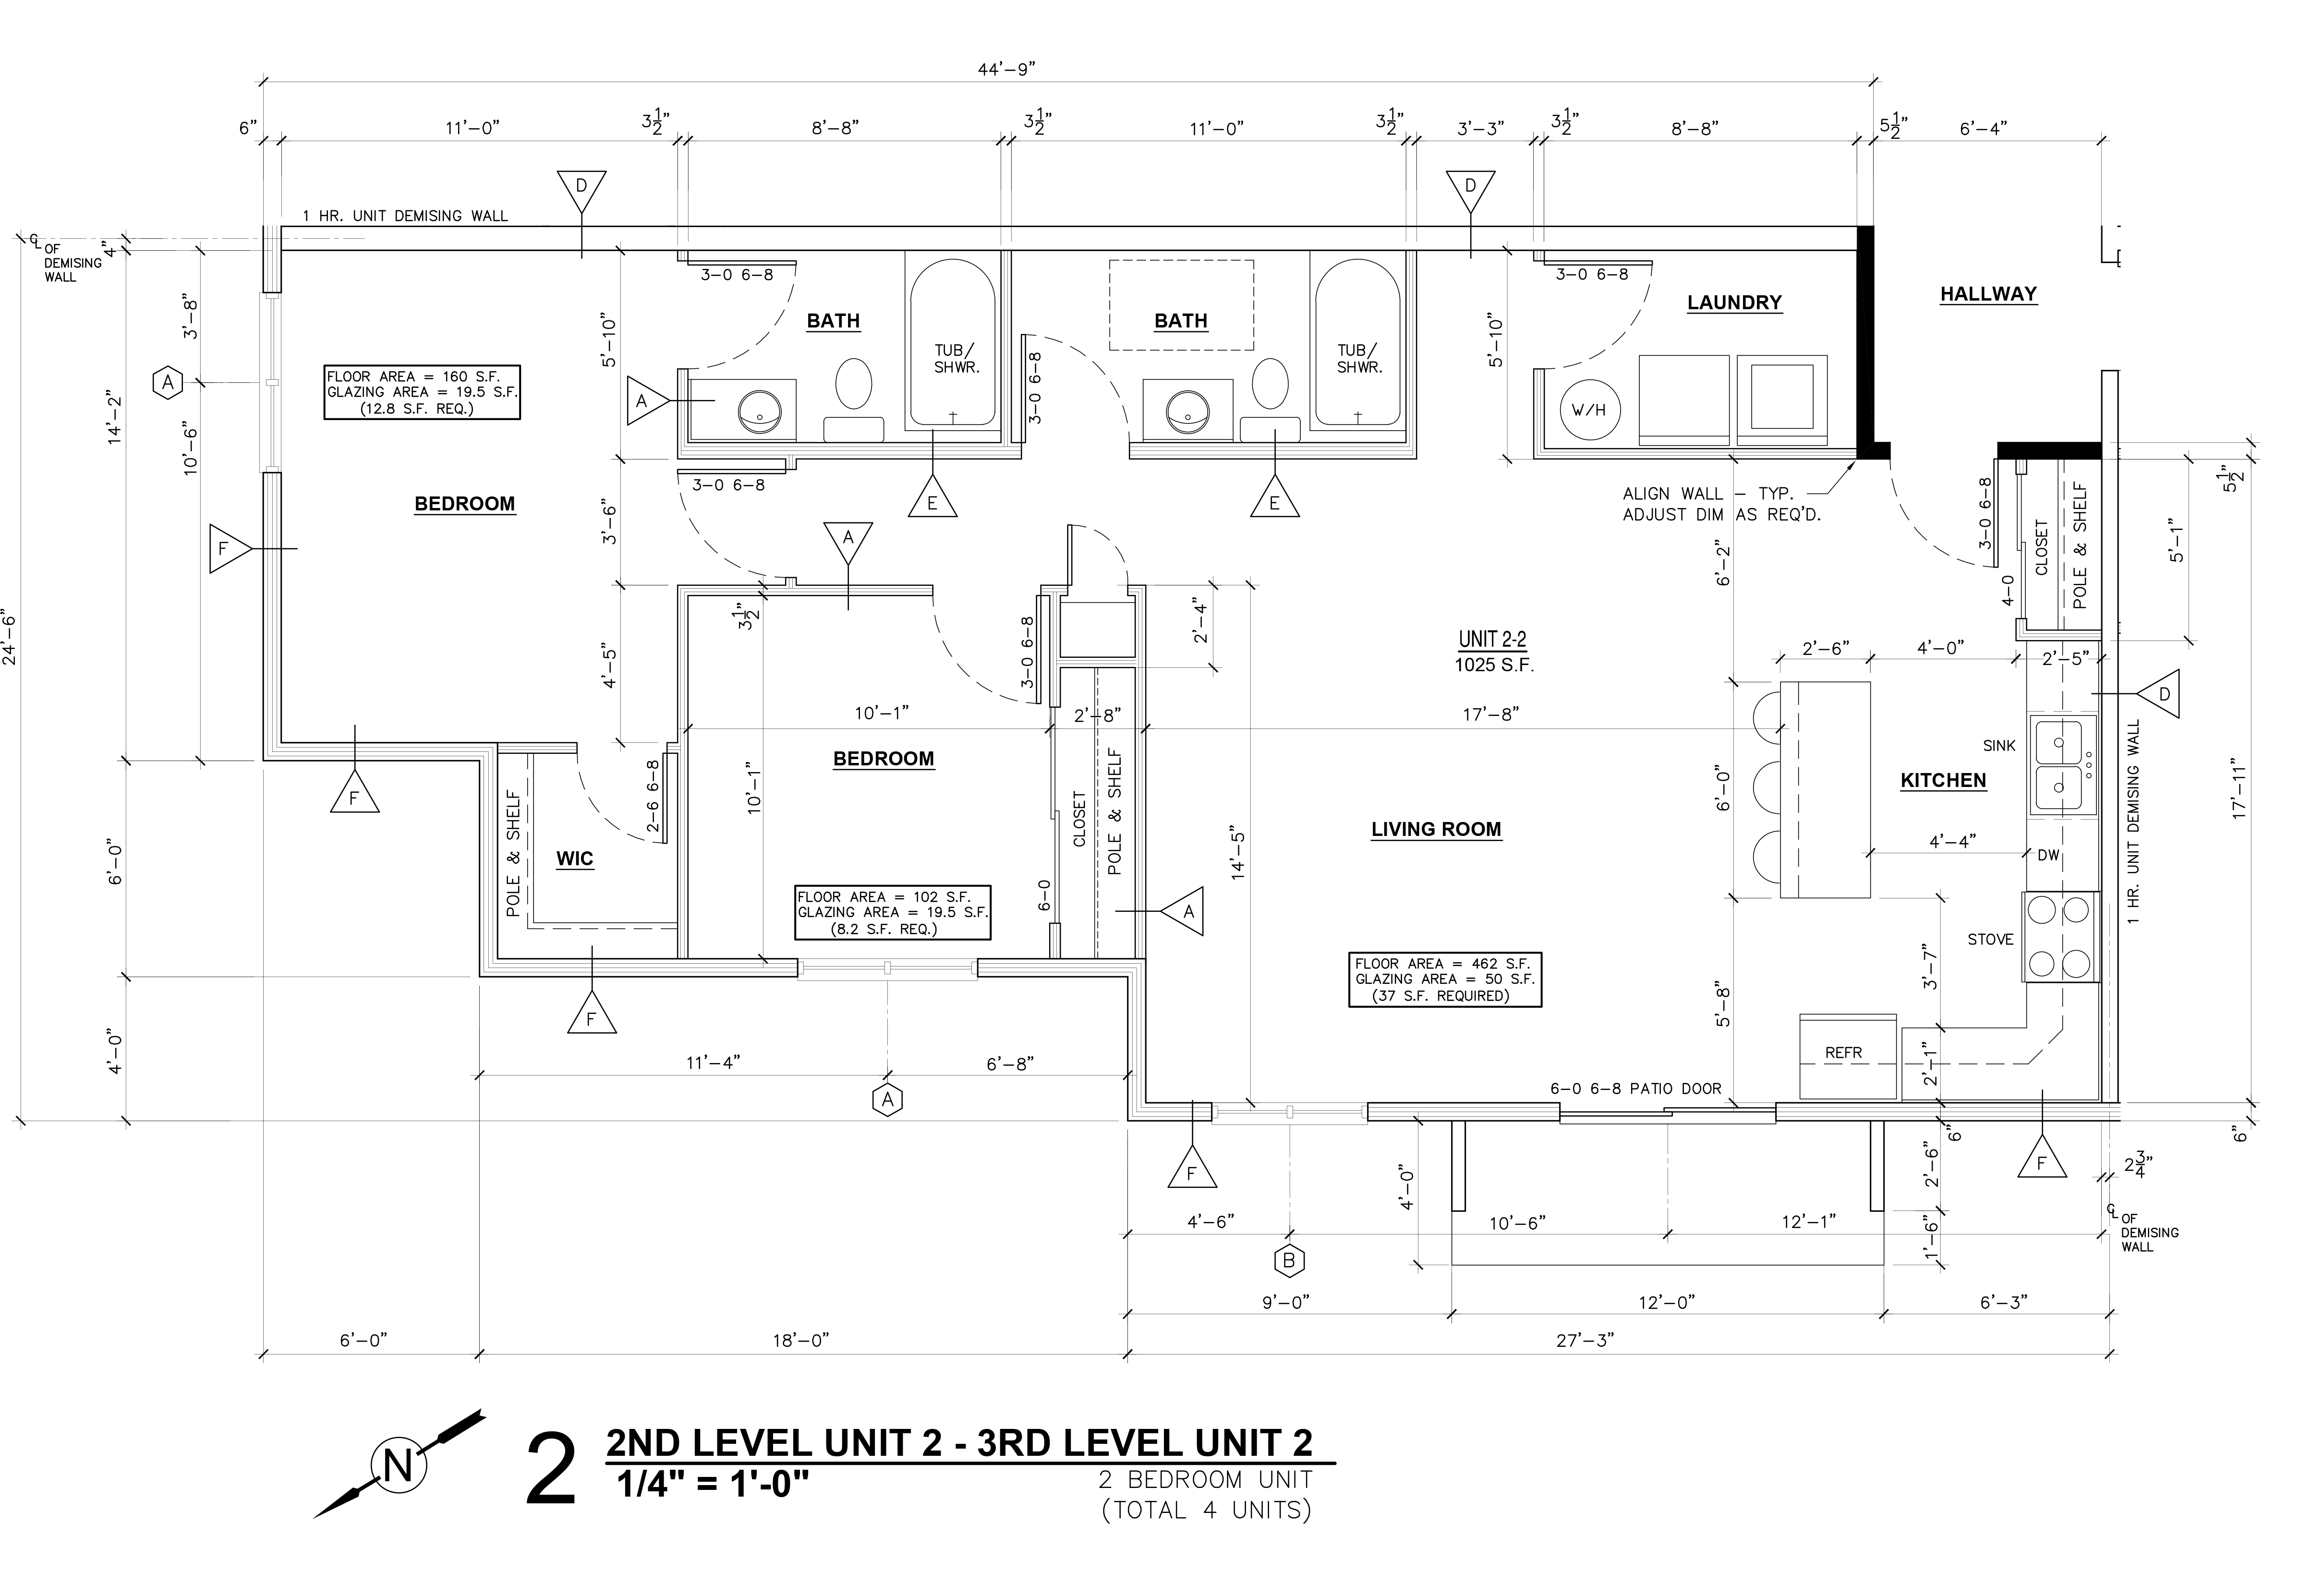 Hawks Nest Apartments 2nd and 3rd level unit 2 floor plan